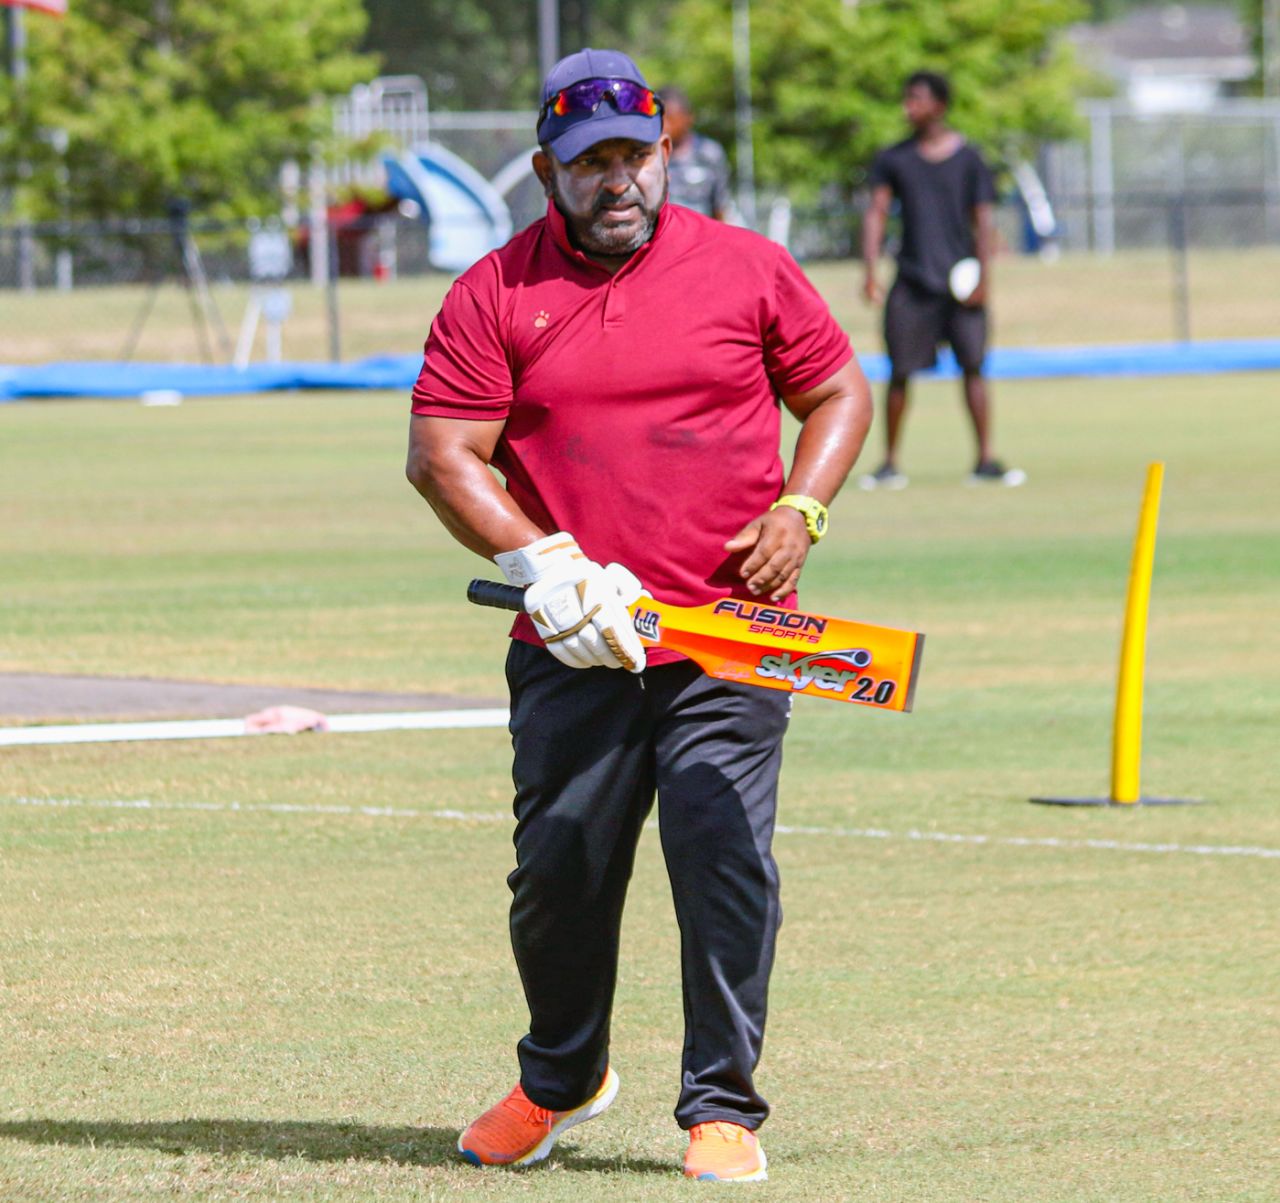 Nepal head coach Pubudu Dassanayake hits catches during pregame warmups, USA v Nepal, ICC Cricket World Cup League Two, Pearland, June 11, 2022